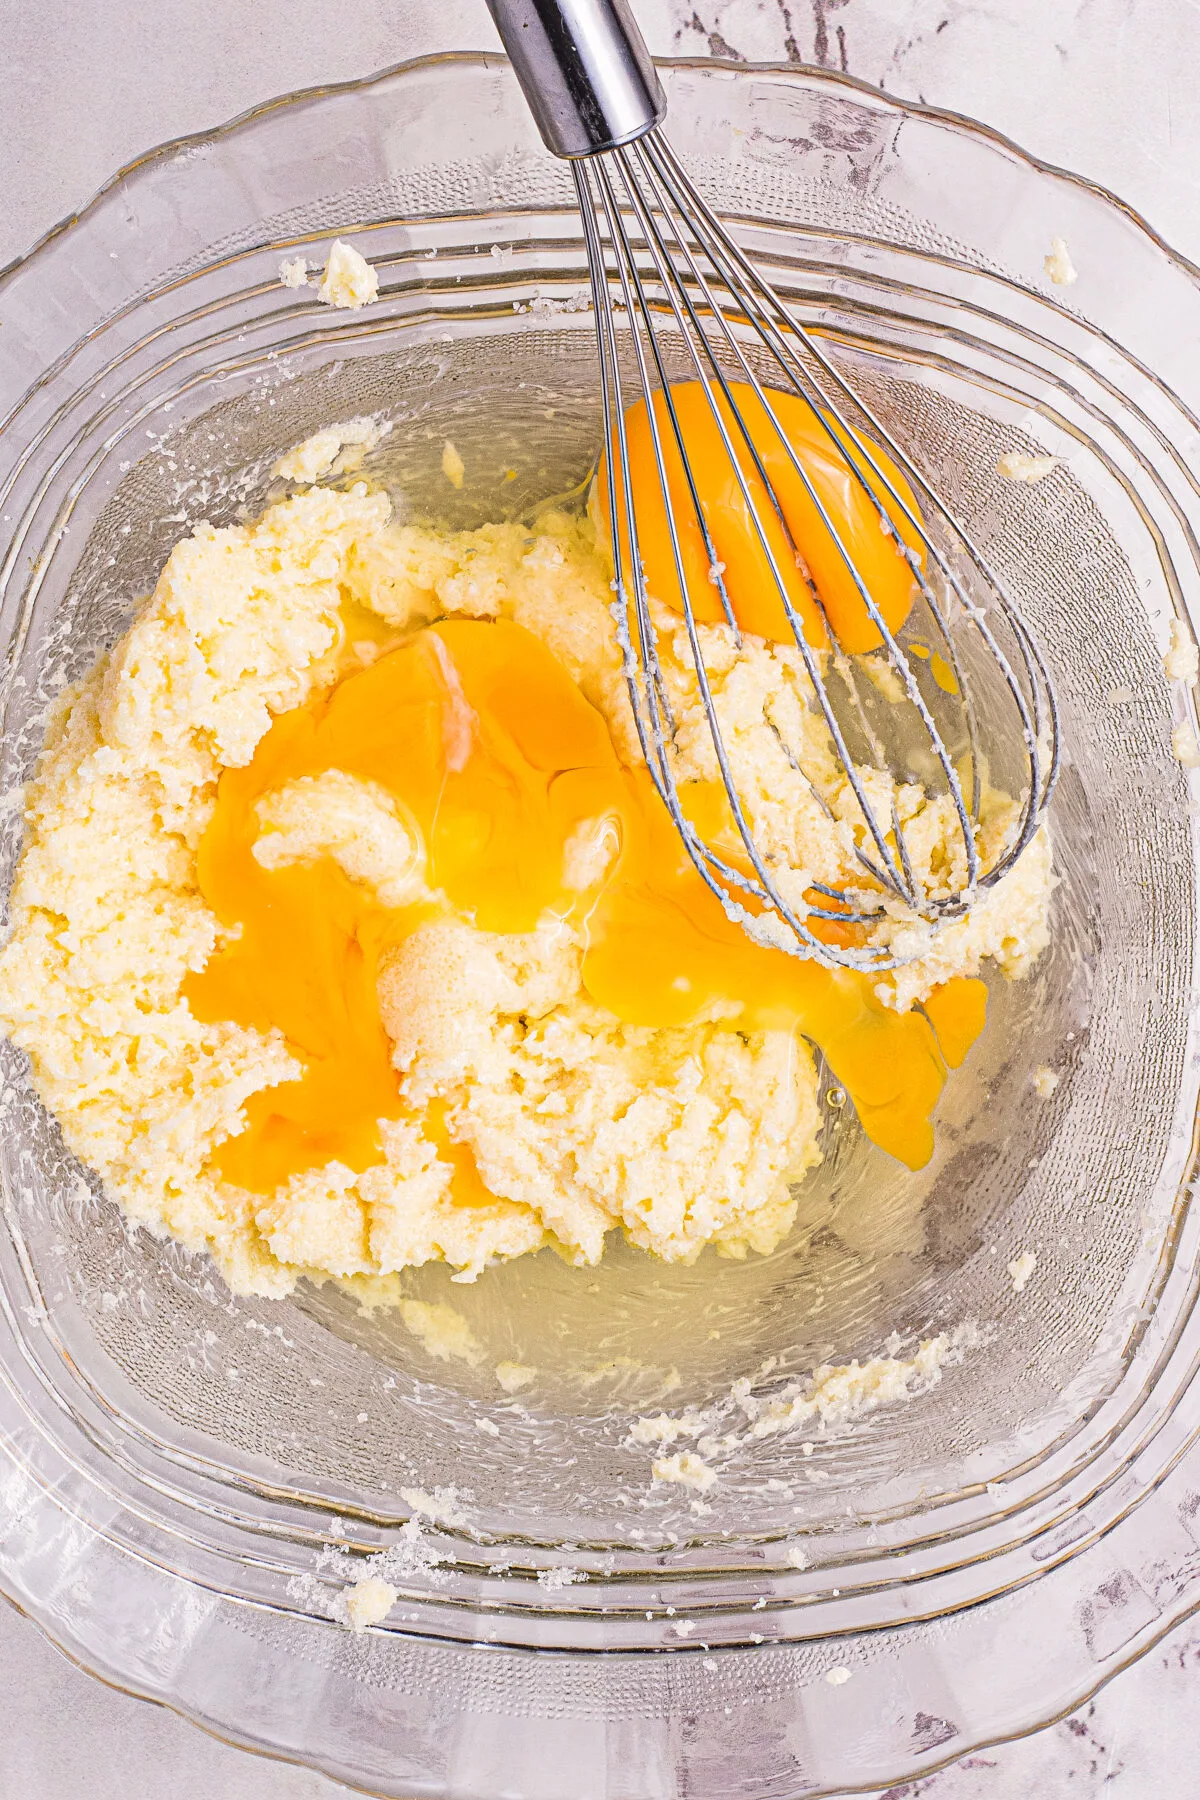 Eggs being mixed into the butter and sugar.